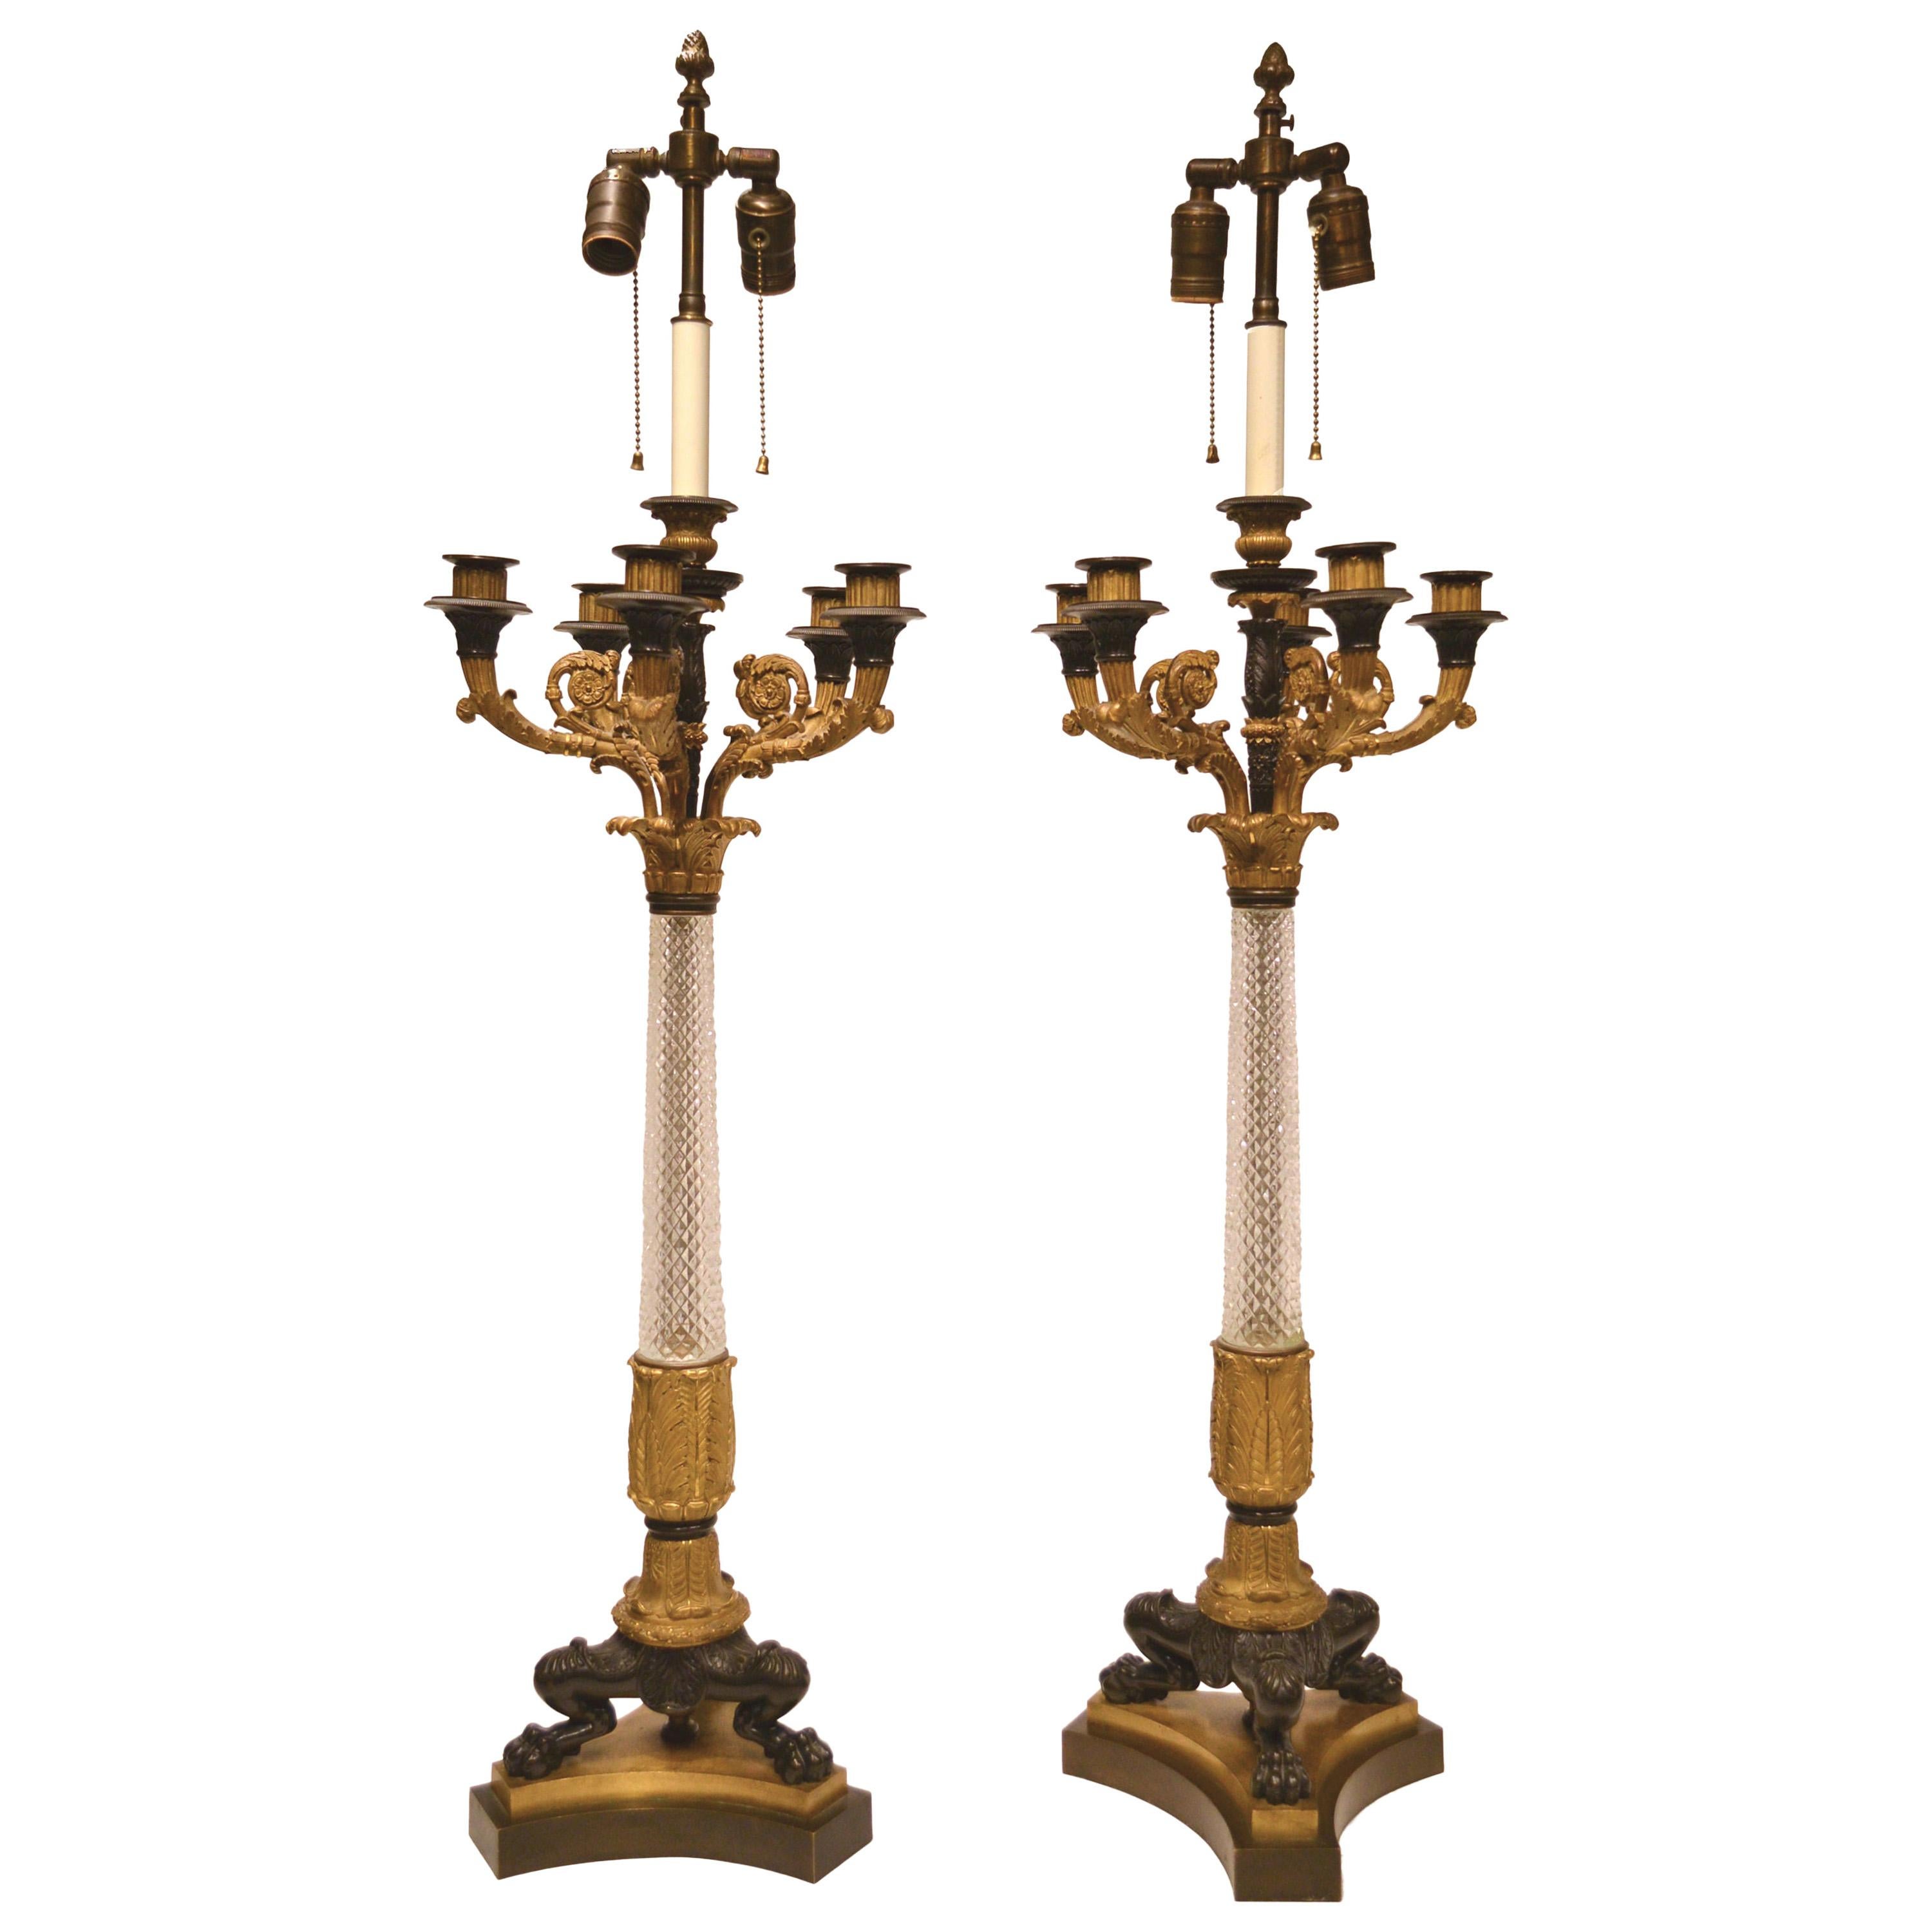 Pair of French 19th Century Empire Cut Glass and Bronze Candelabras / Lamps